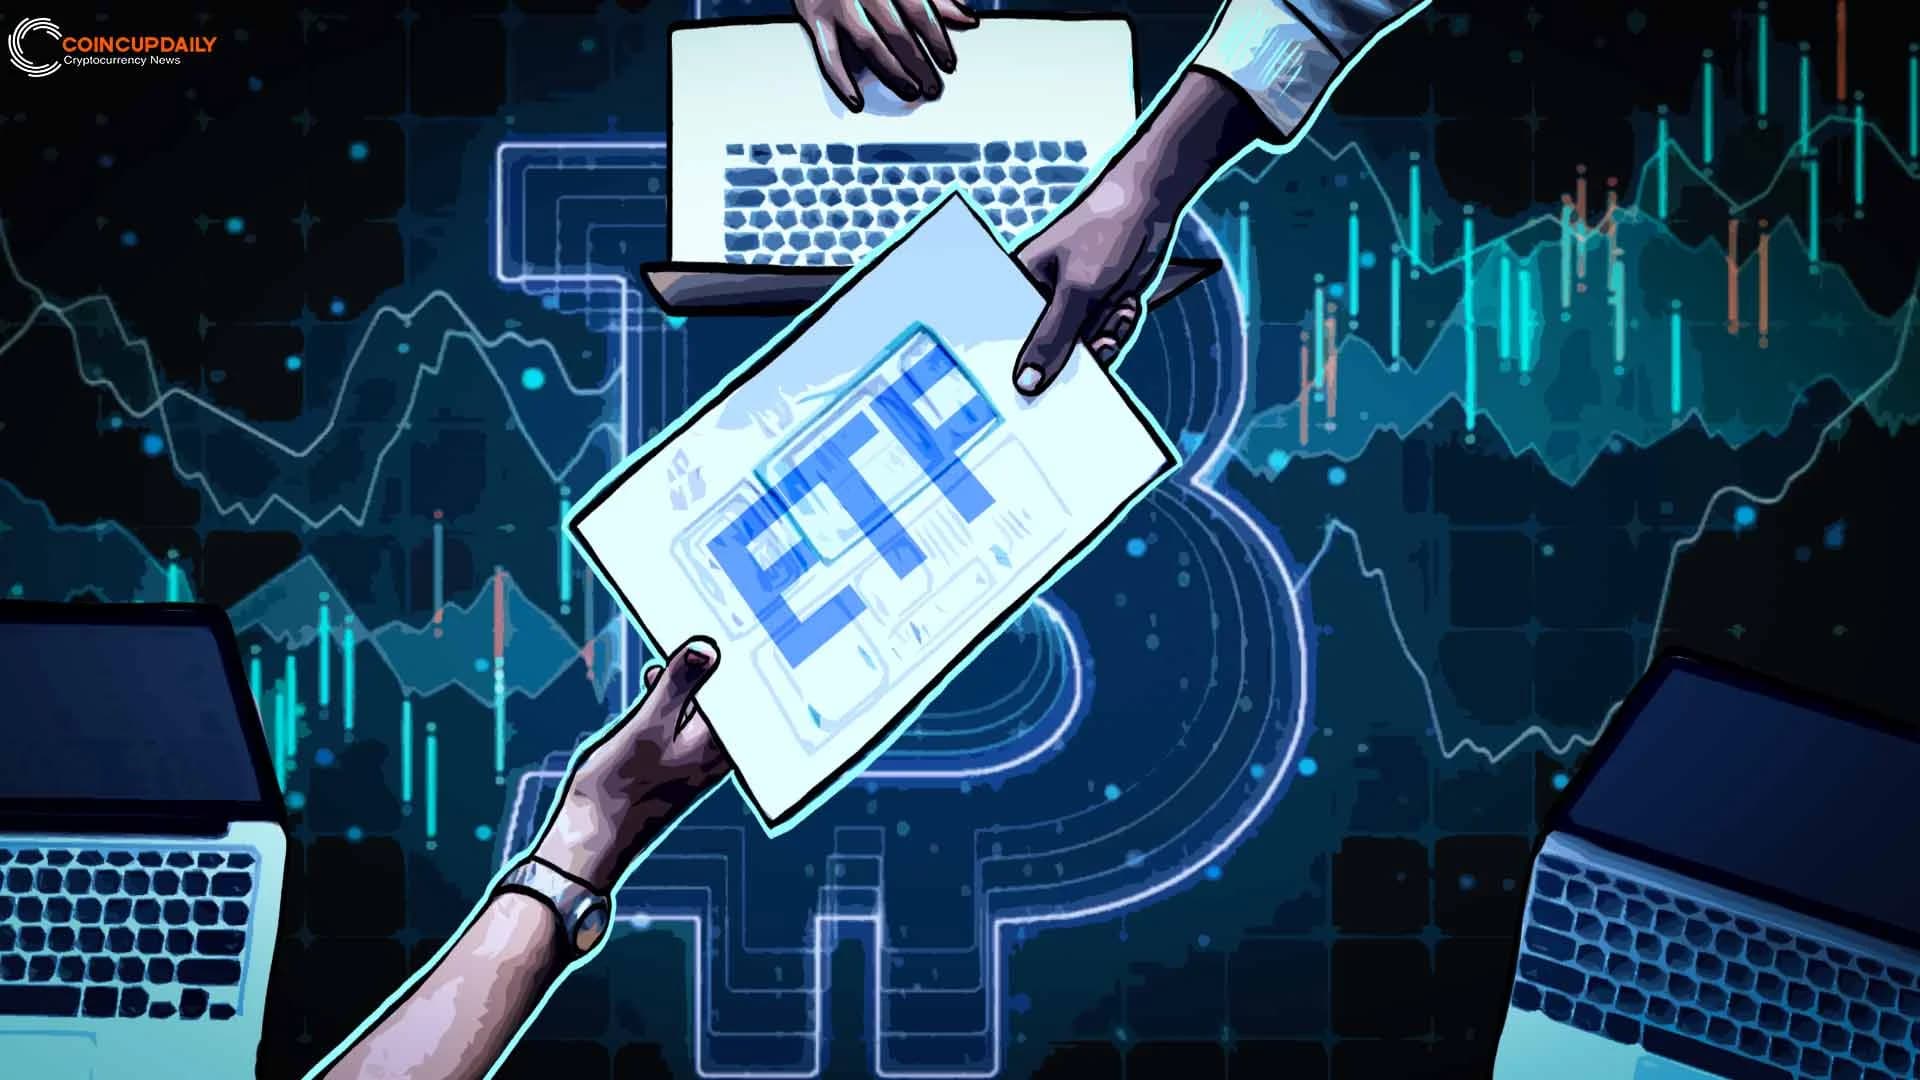 Daily Trading Volume of BlackRock and ProShares Bitcoin ETFs Exceeds GBTC